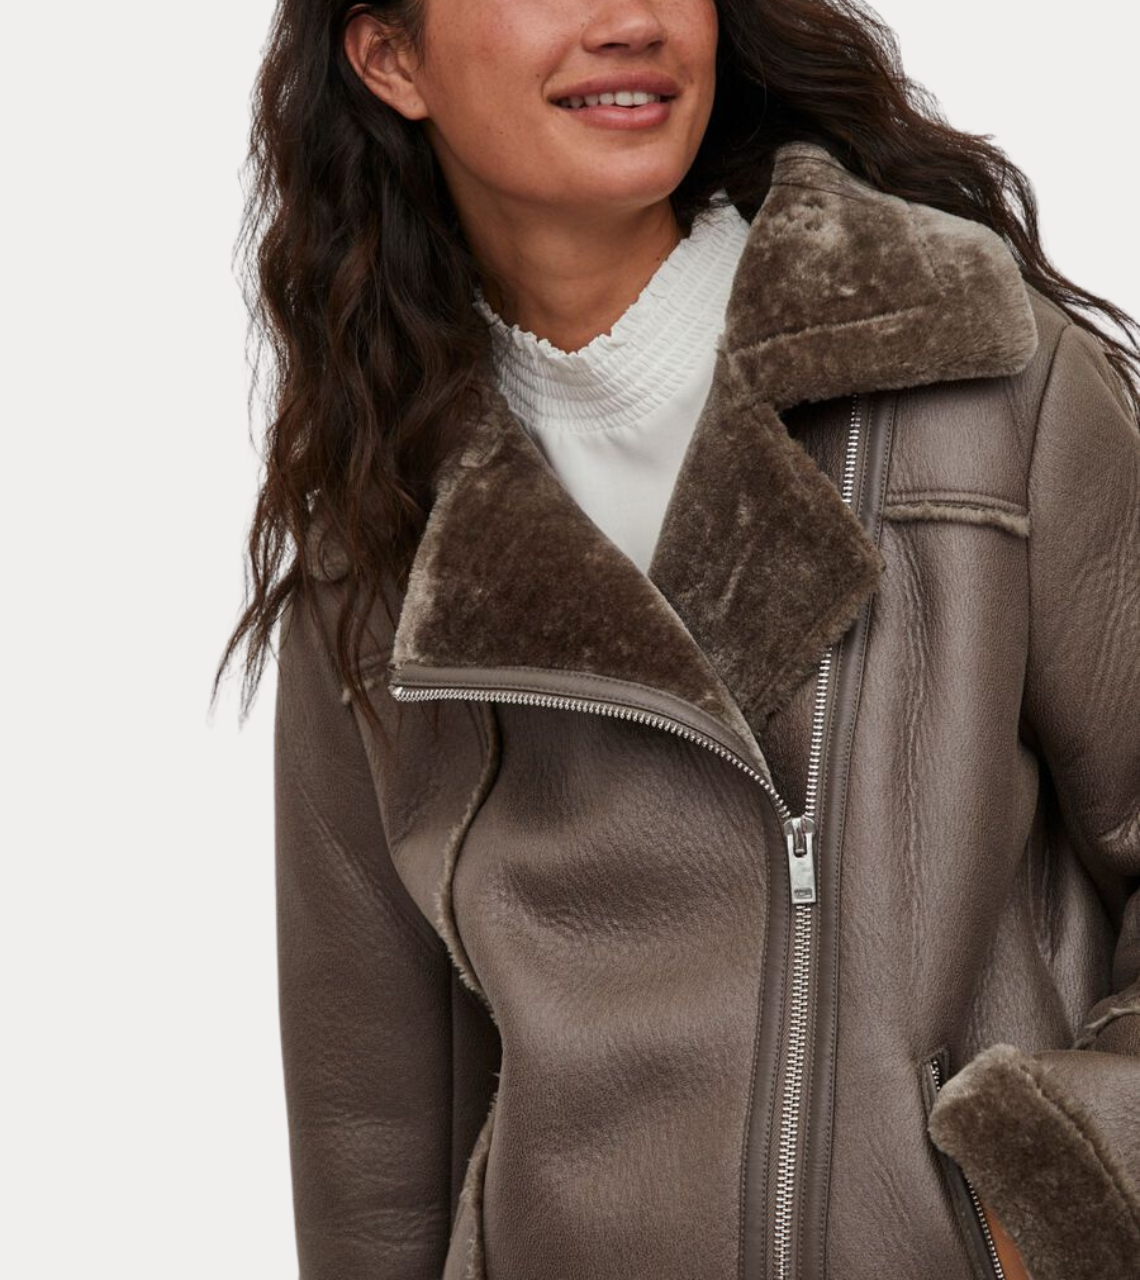  Women's B3 Brown Shearling Leather Jacket 